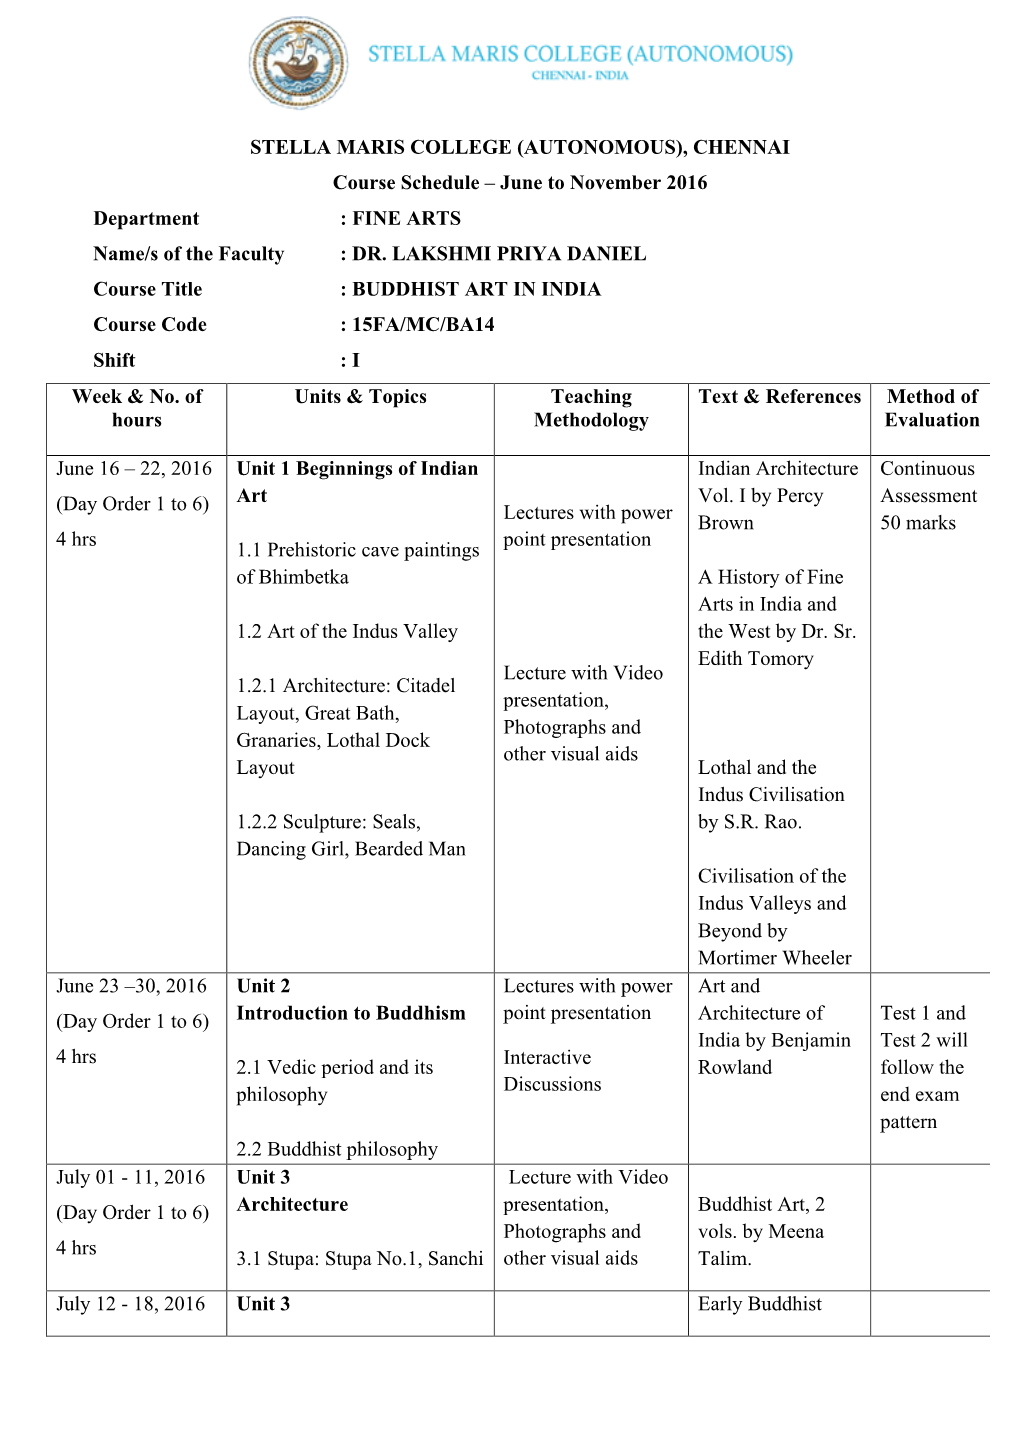 STELLA MARIS COLLEGE (AUTONOMOUS), CHENNAI Course Schedule – June to November 2016 Department : FINE ARTS Name/S of the Faculty : DR